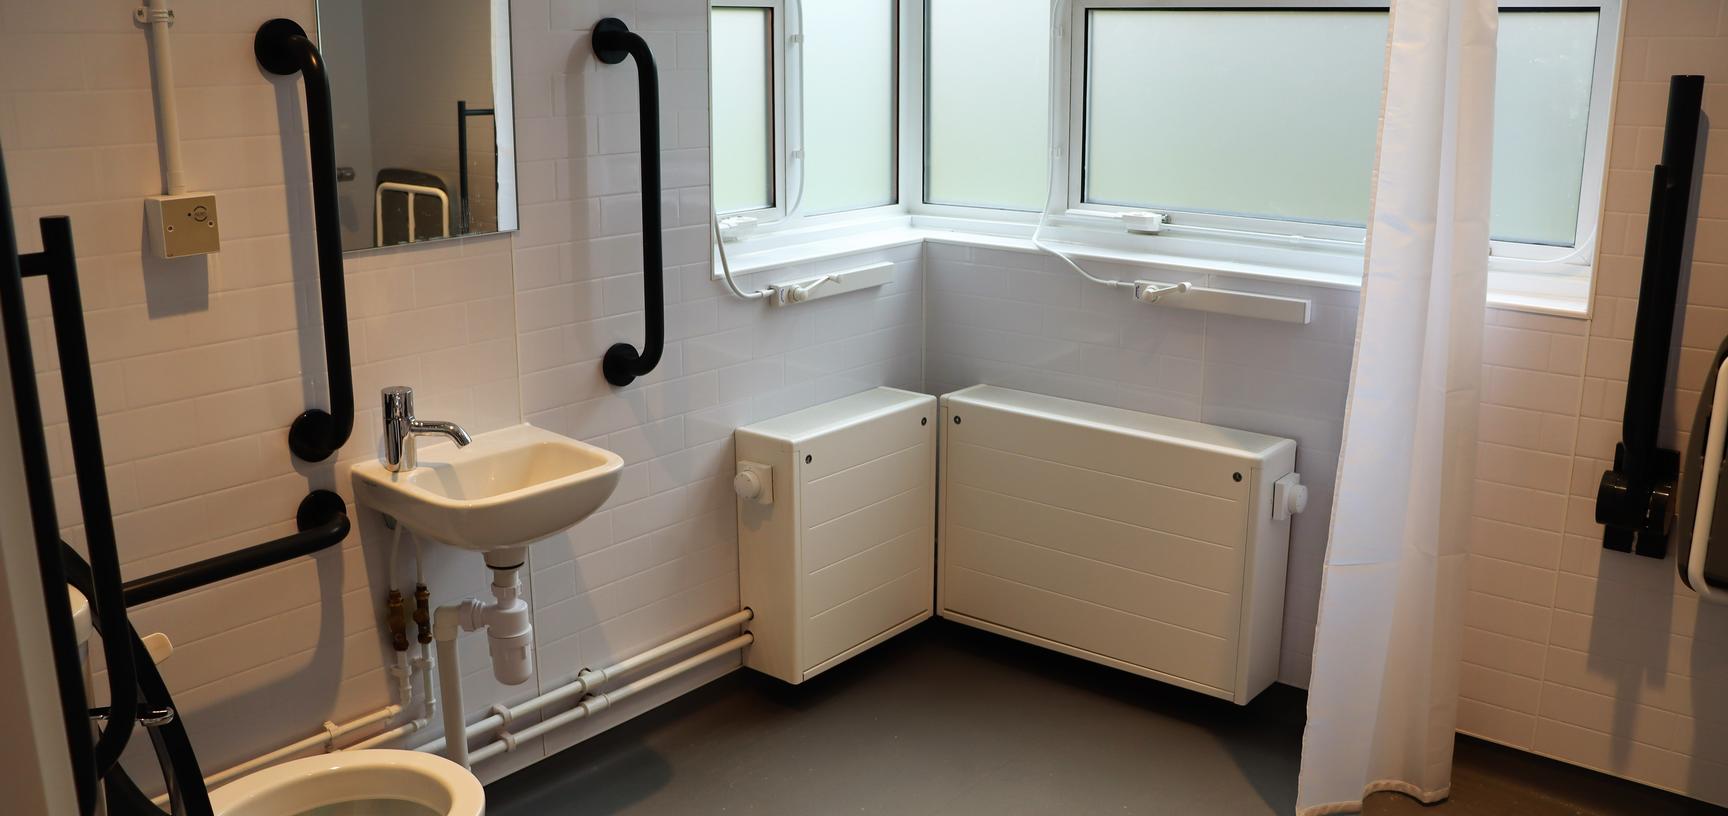 A large accessible bathroom